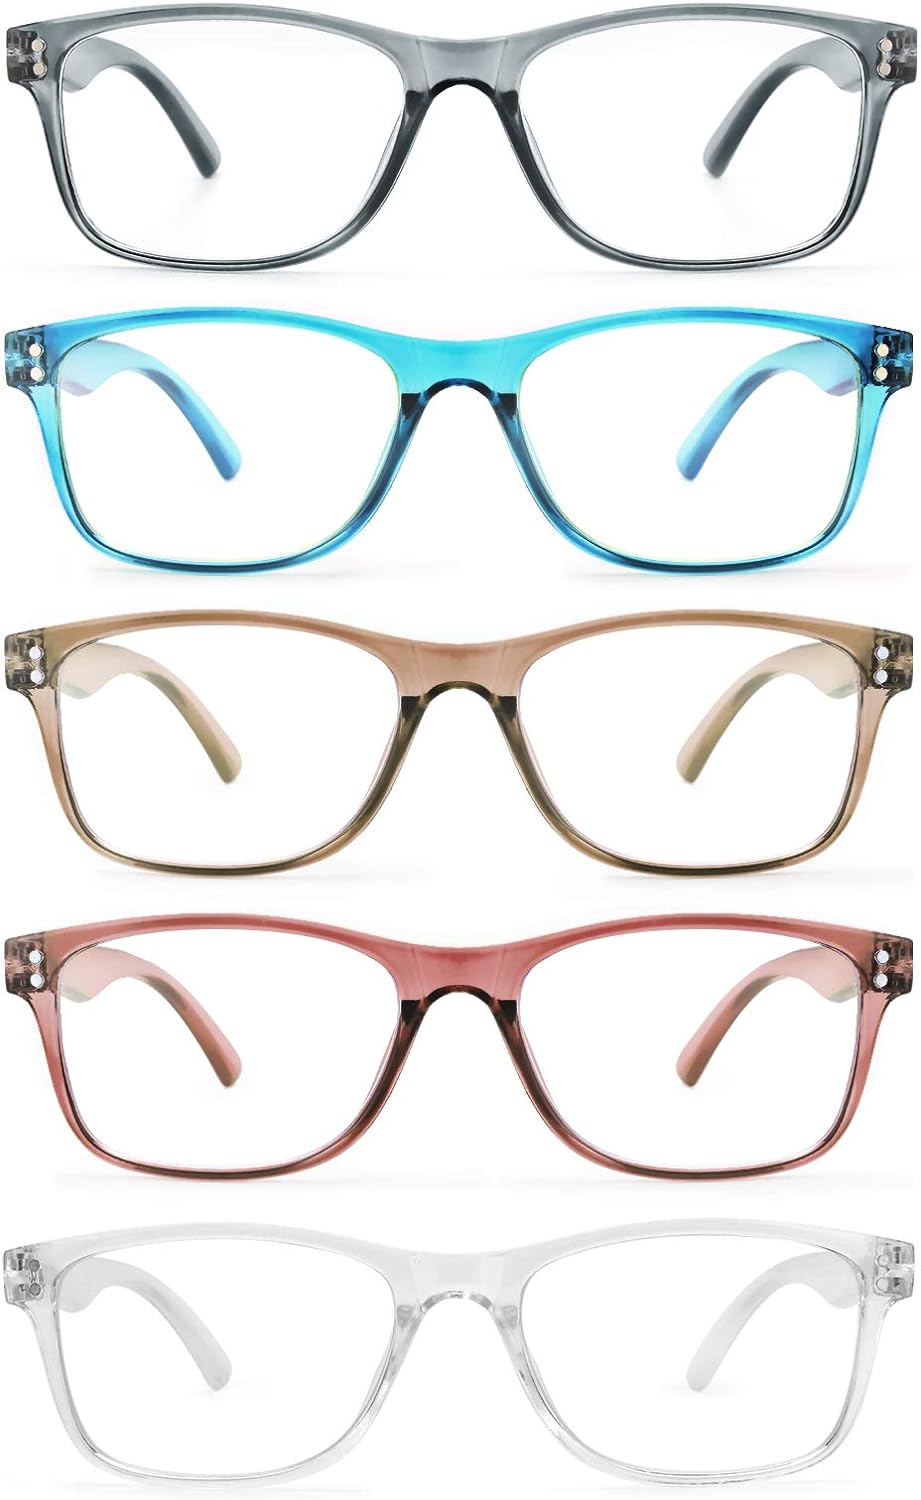 Fetrrc Reading Glasses Blue Light Blocking Computer Readers for WomenMen, Anti GlareFatigue Clear Square Eyeglasses 5 Pairs